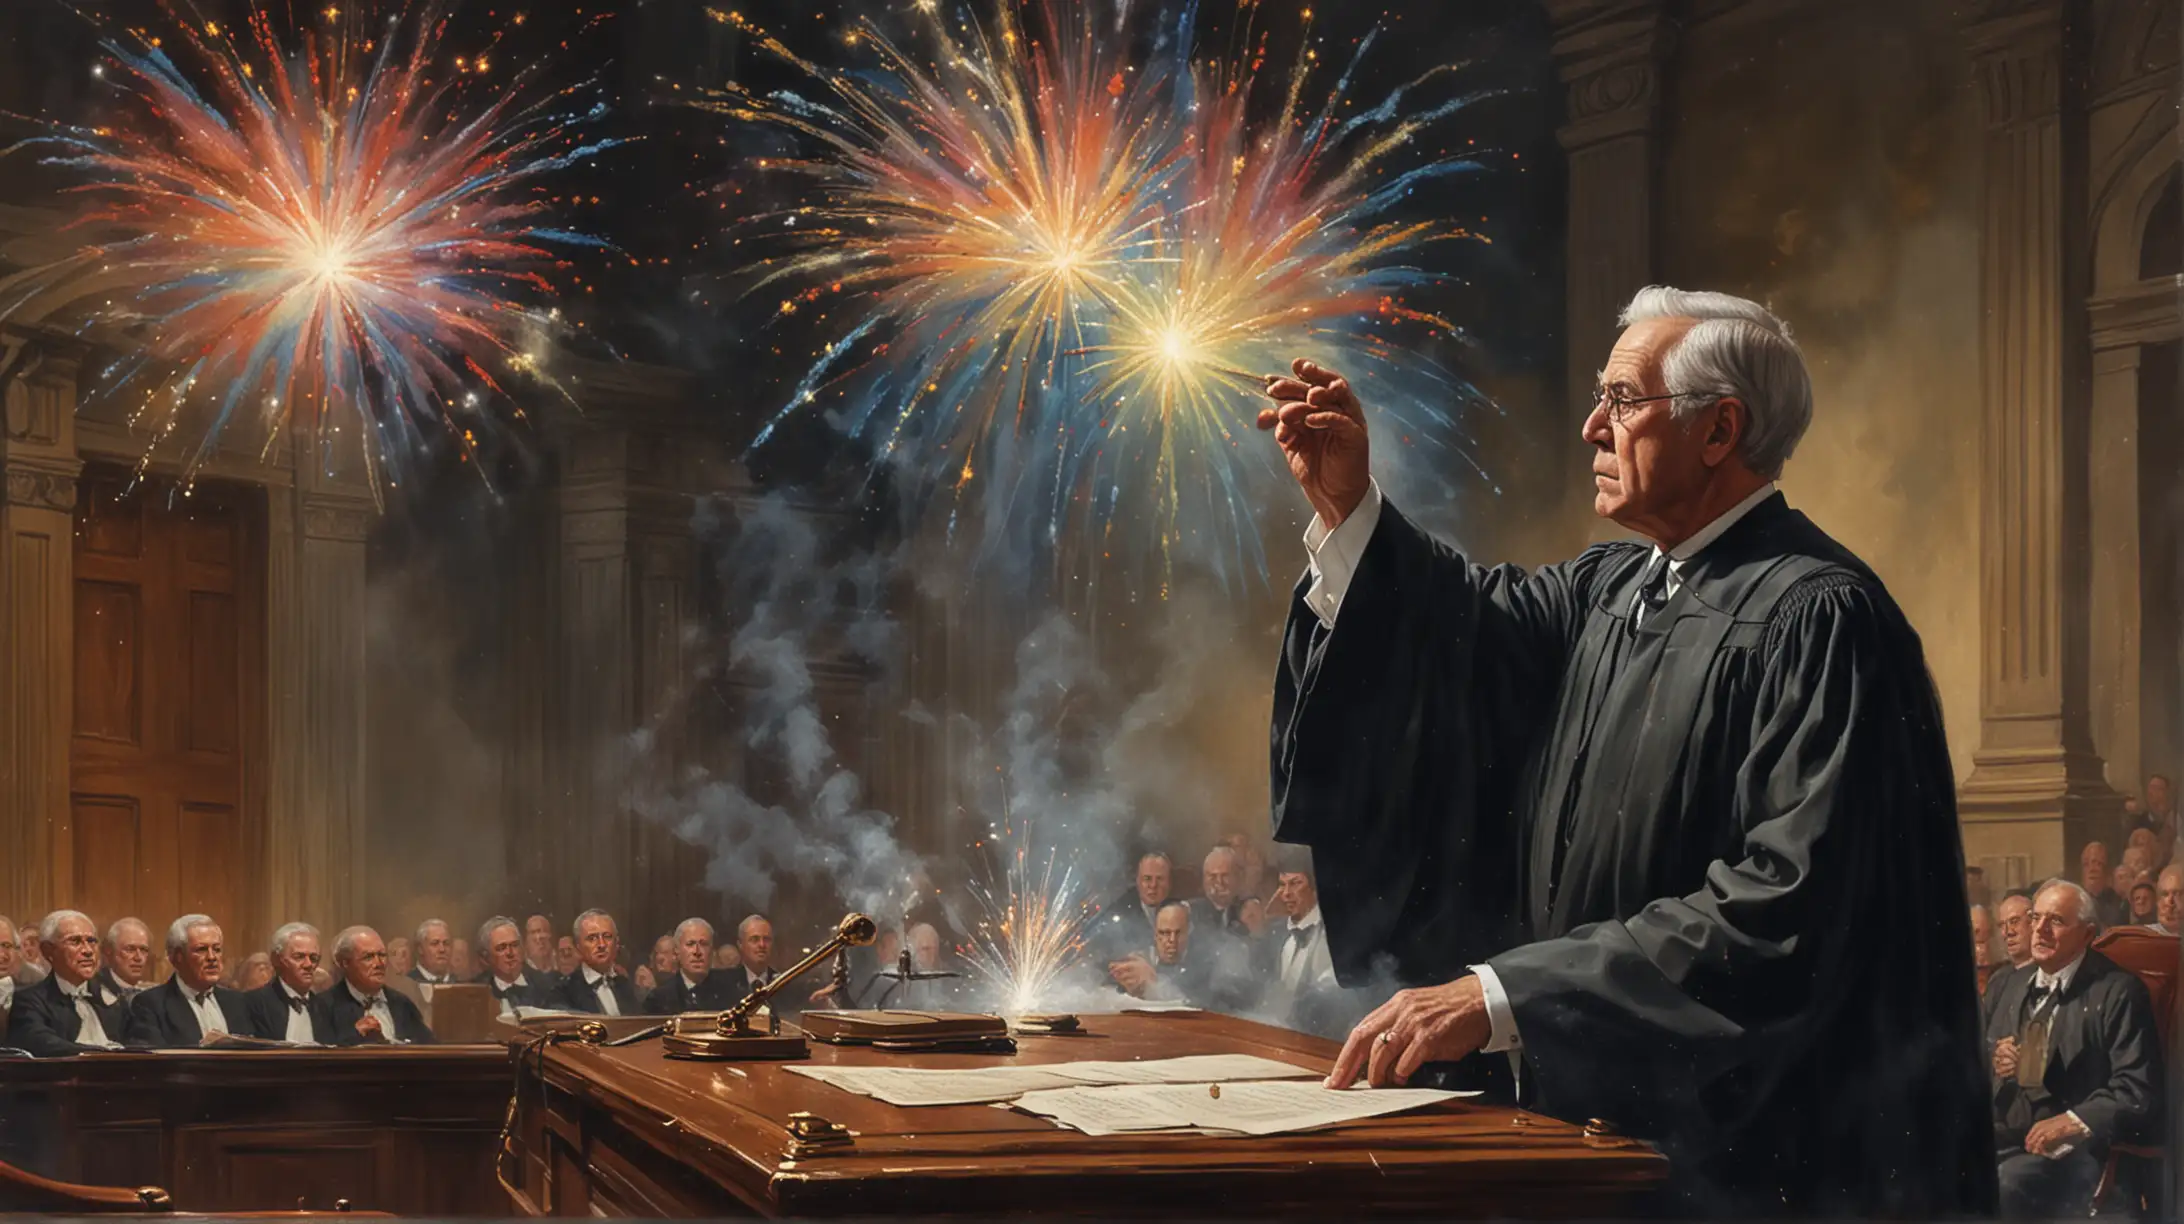 an old painting of a courtroom judge with fireworks in background